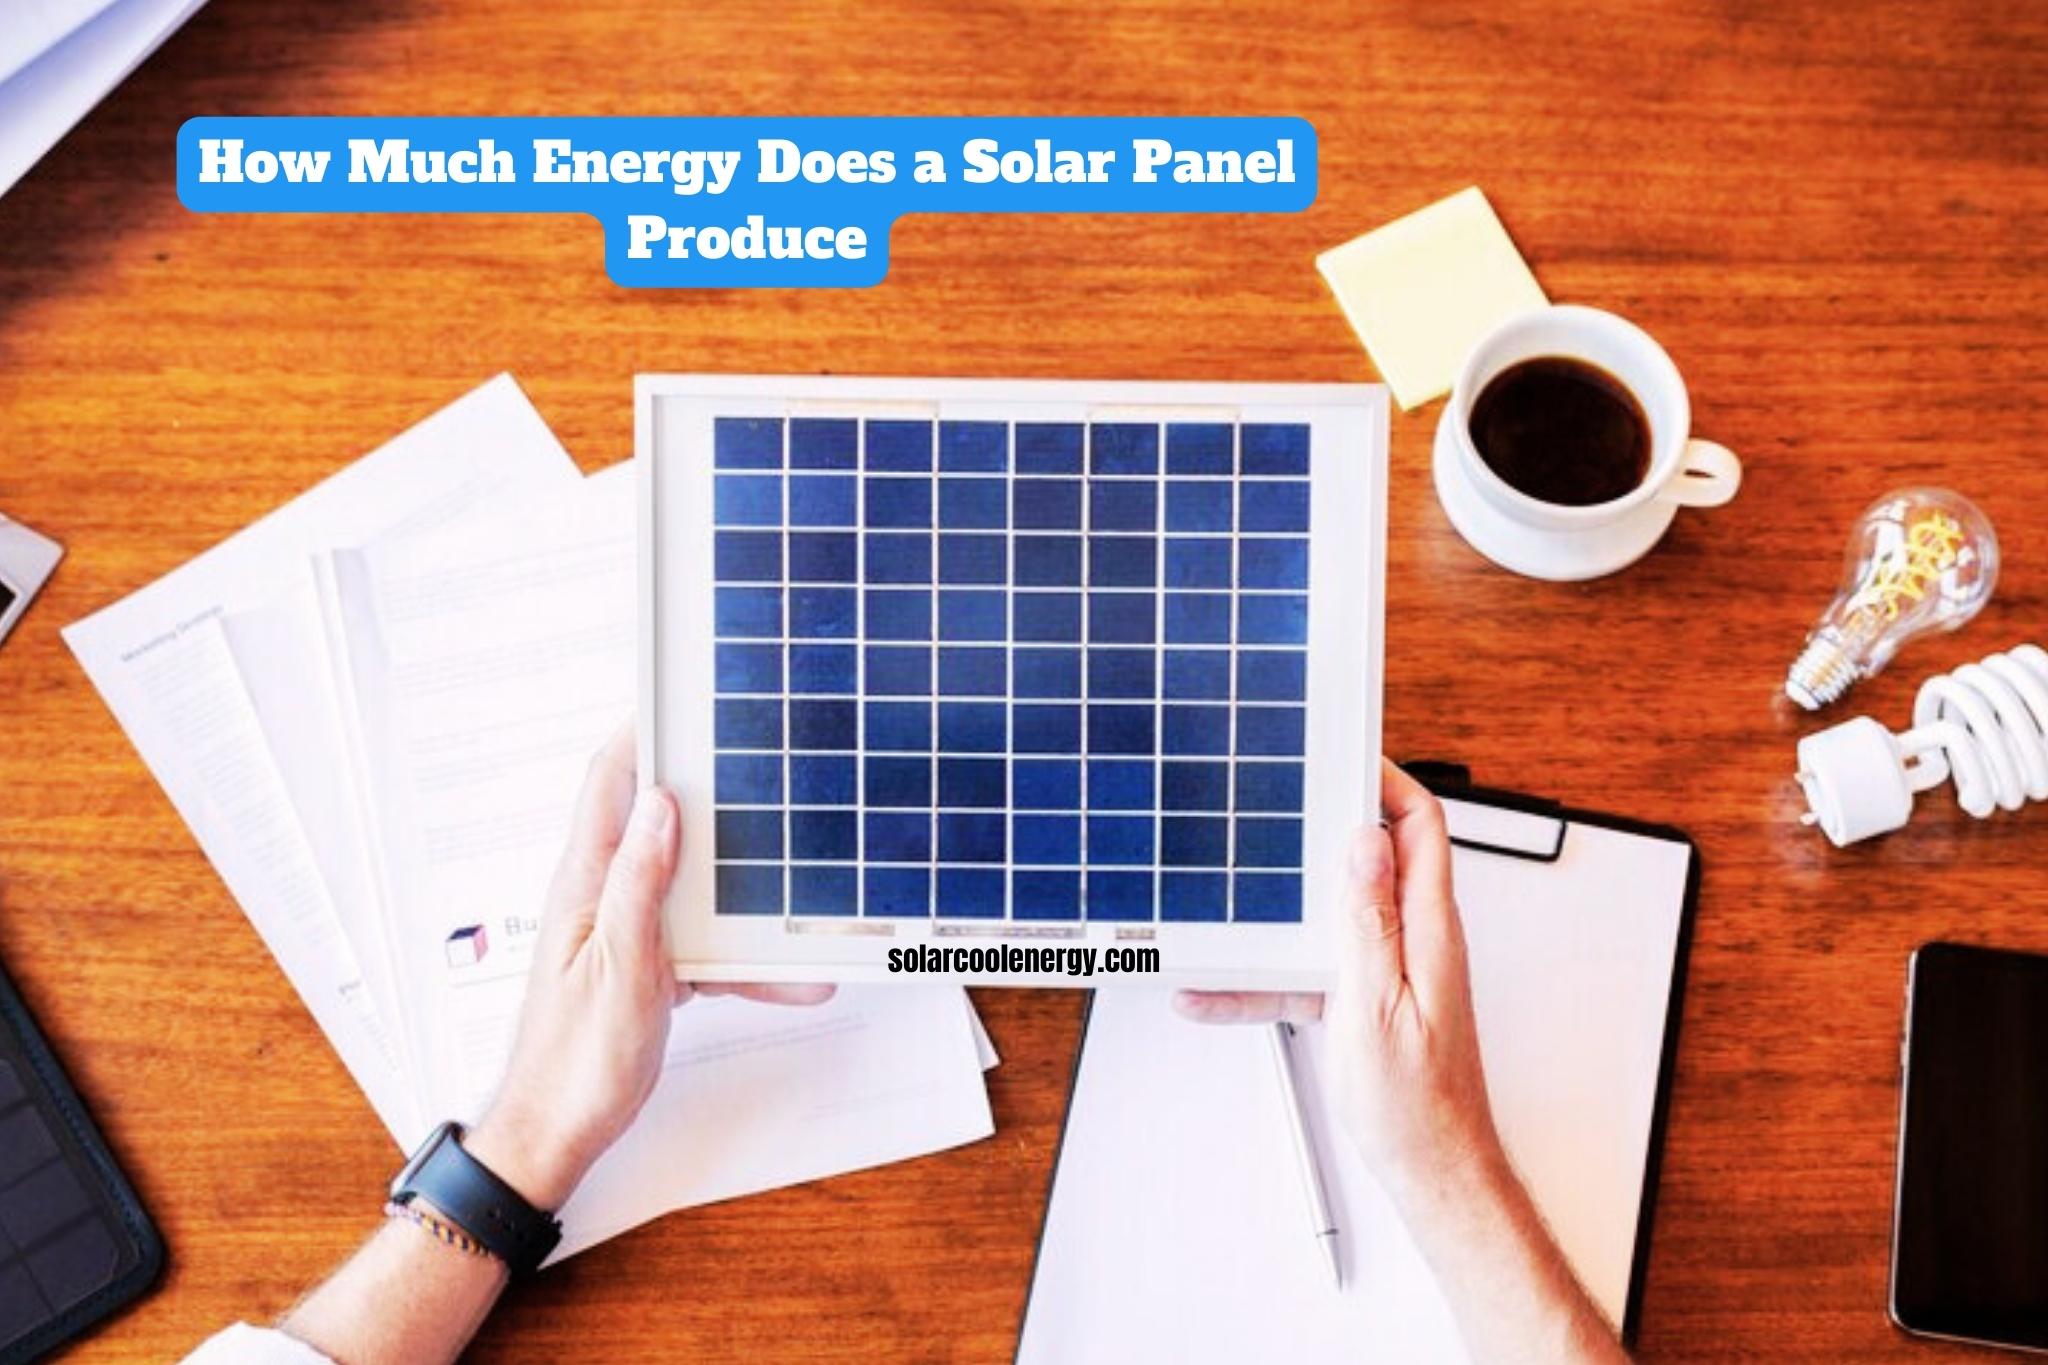 How Much Energy Does a Solar Panel Produce